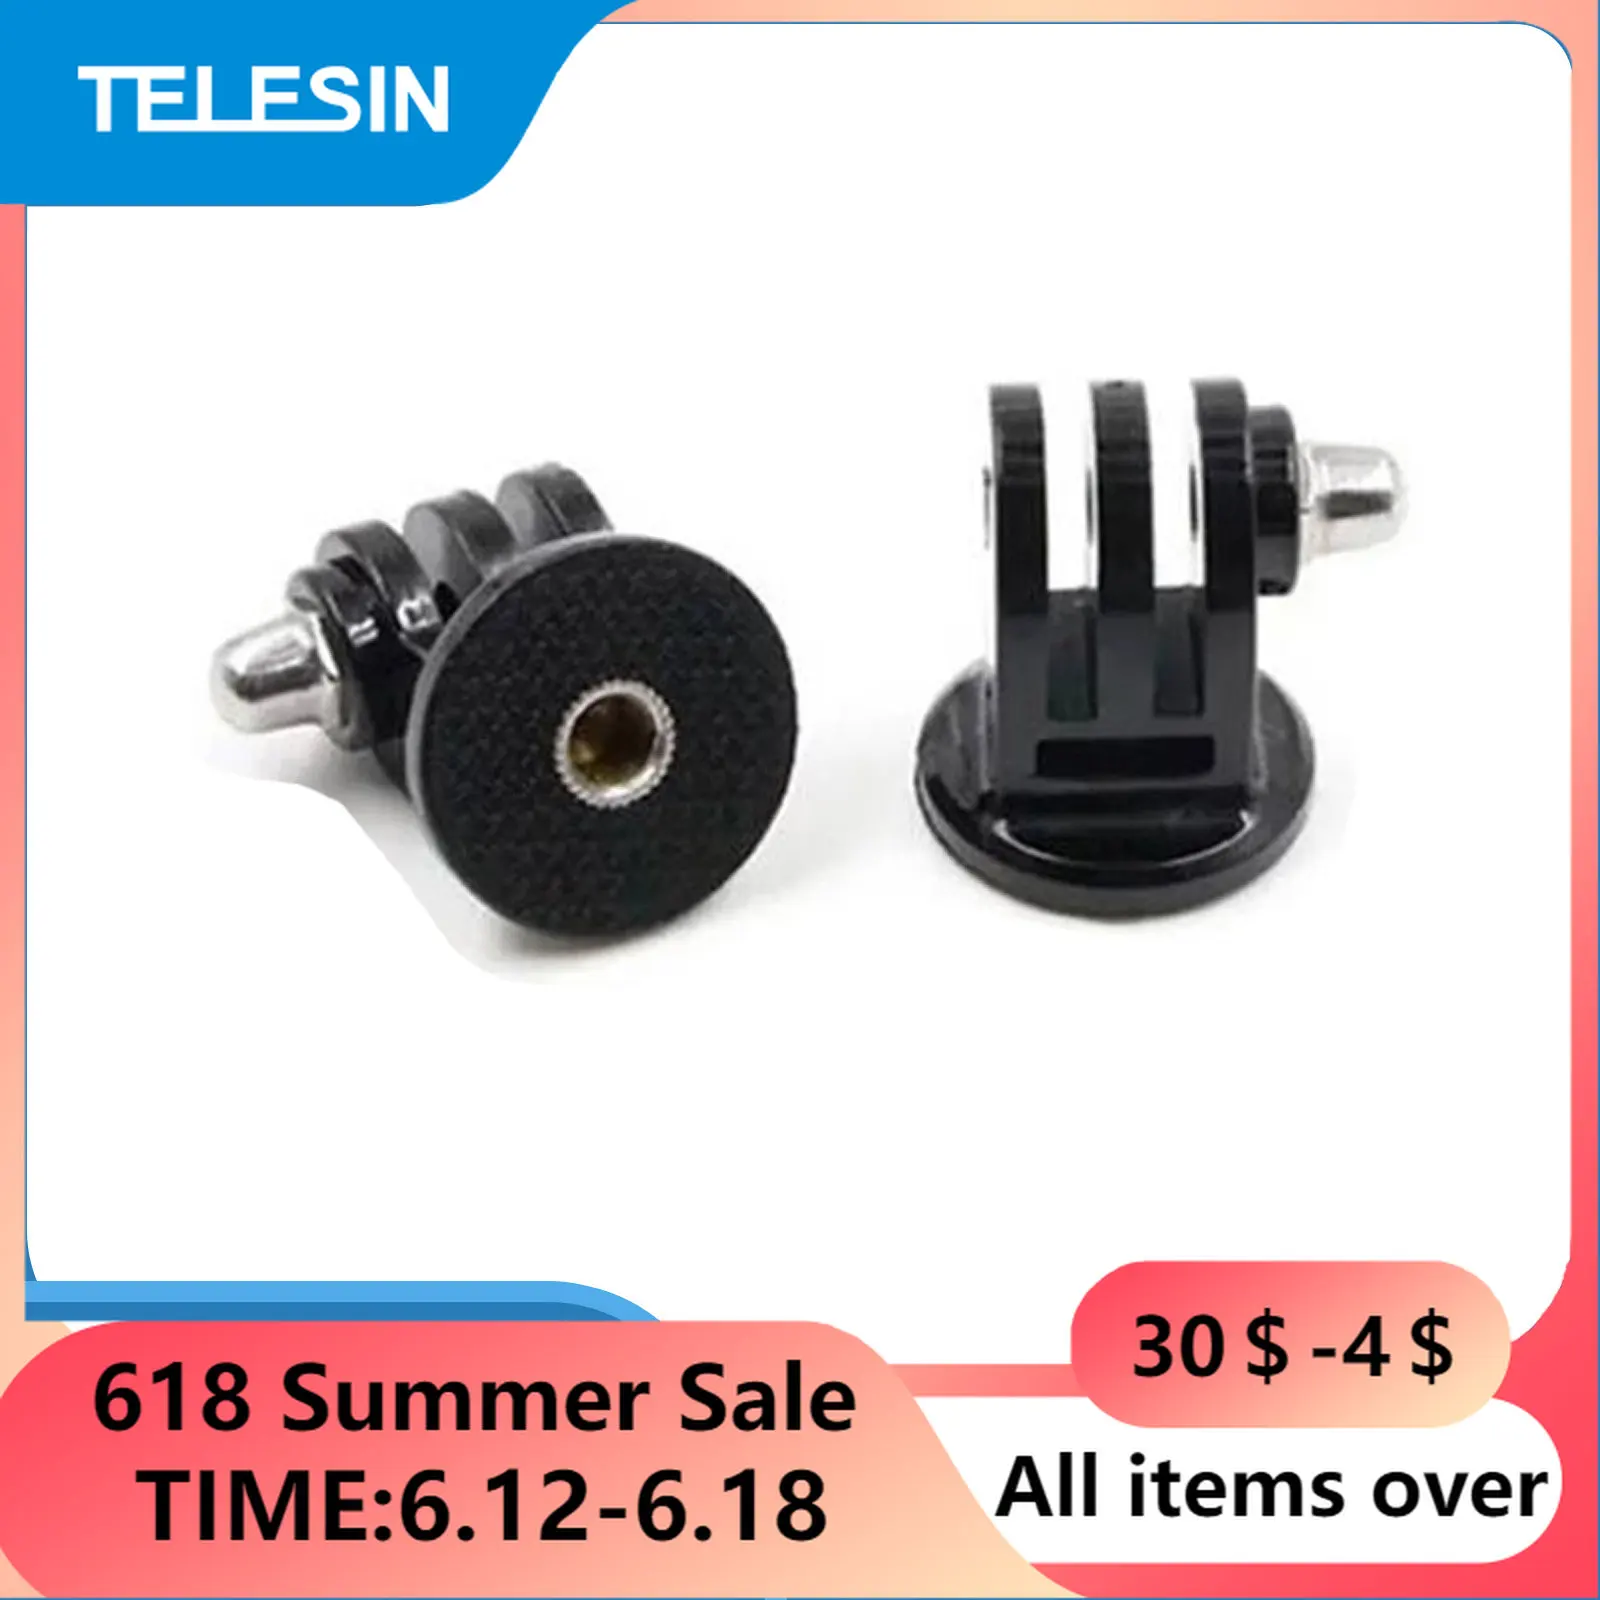 TELESIN 2pcs Tripod Mount Monopod Adapter for Selfie Stick PTZ Mini Tripod for Gopro Connection Stand Accessories